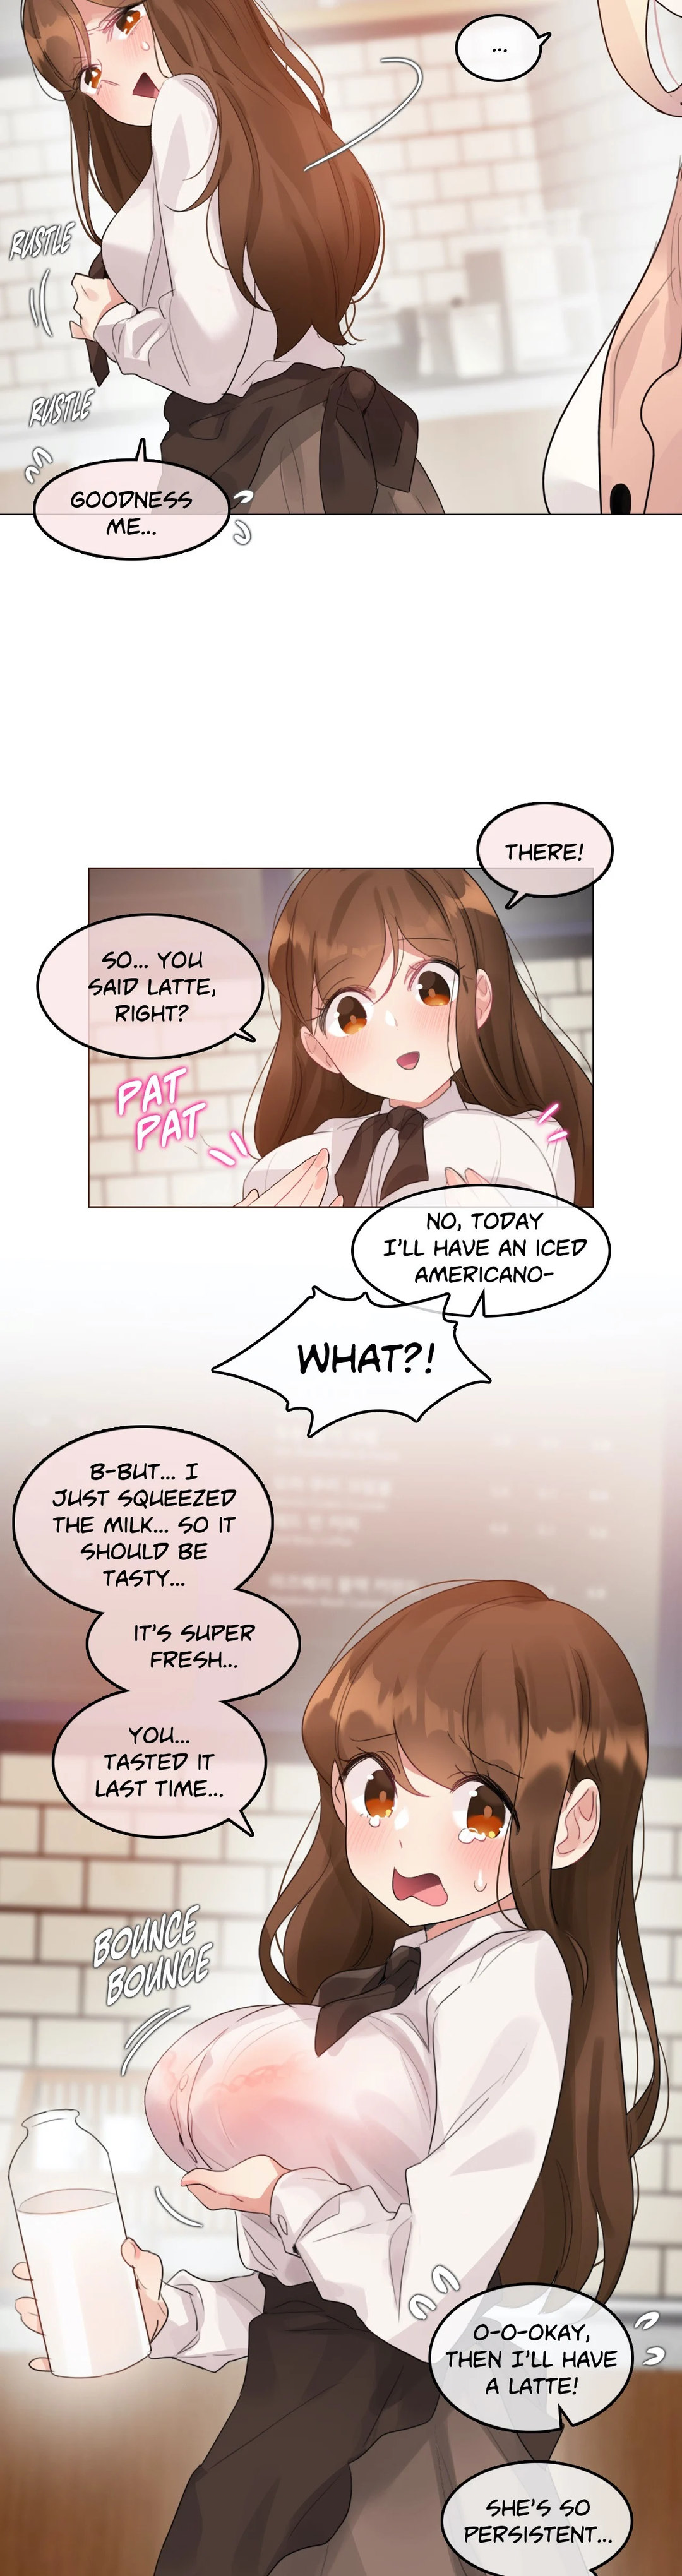 A Pervert’s Daily Life - Chapter 119 Page 3